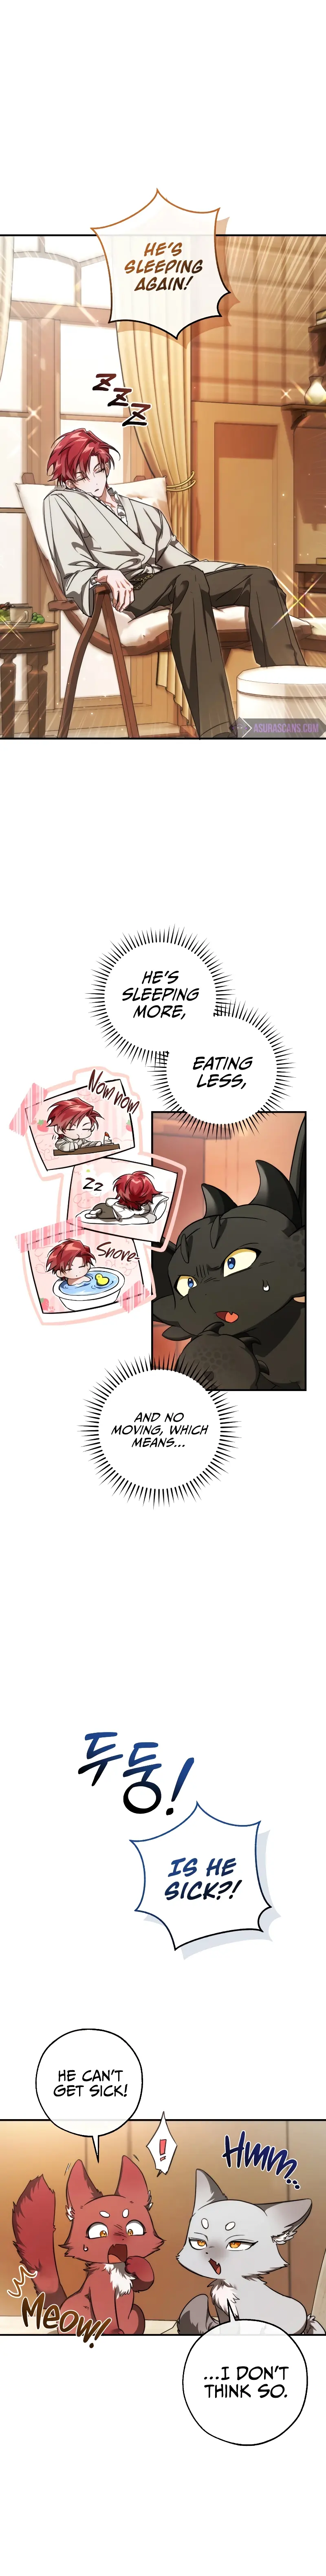 Let's Read Trash of the Count's Family - Chapter 121 Manga Manhwa Comic toon Online Everyday English Translation on Reaper Scan